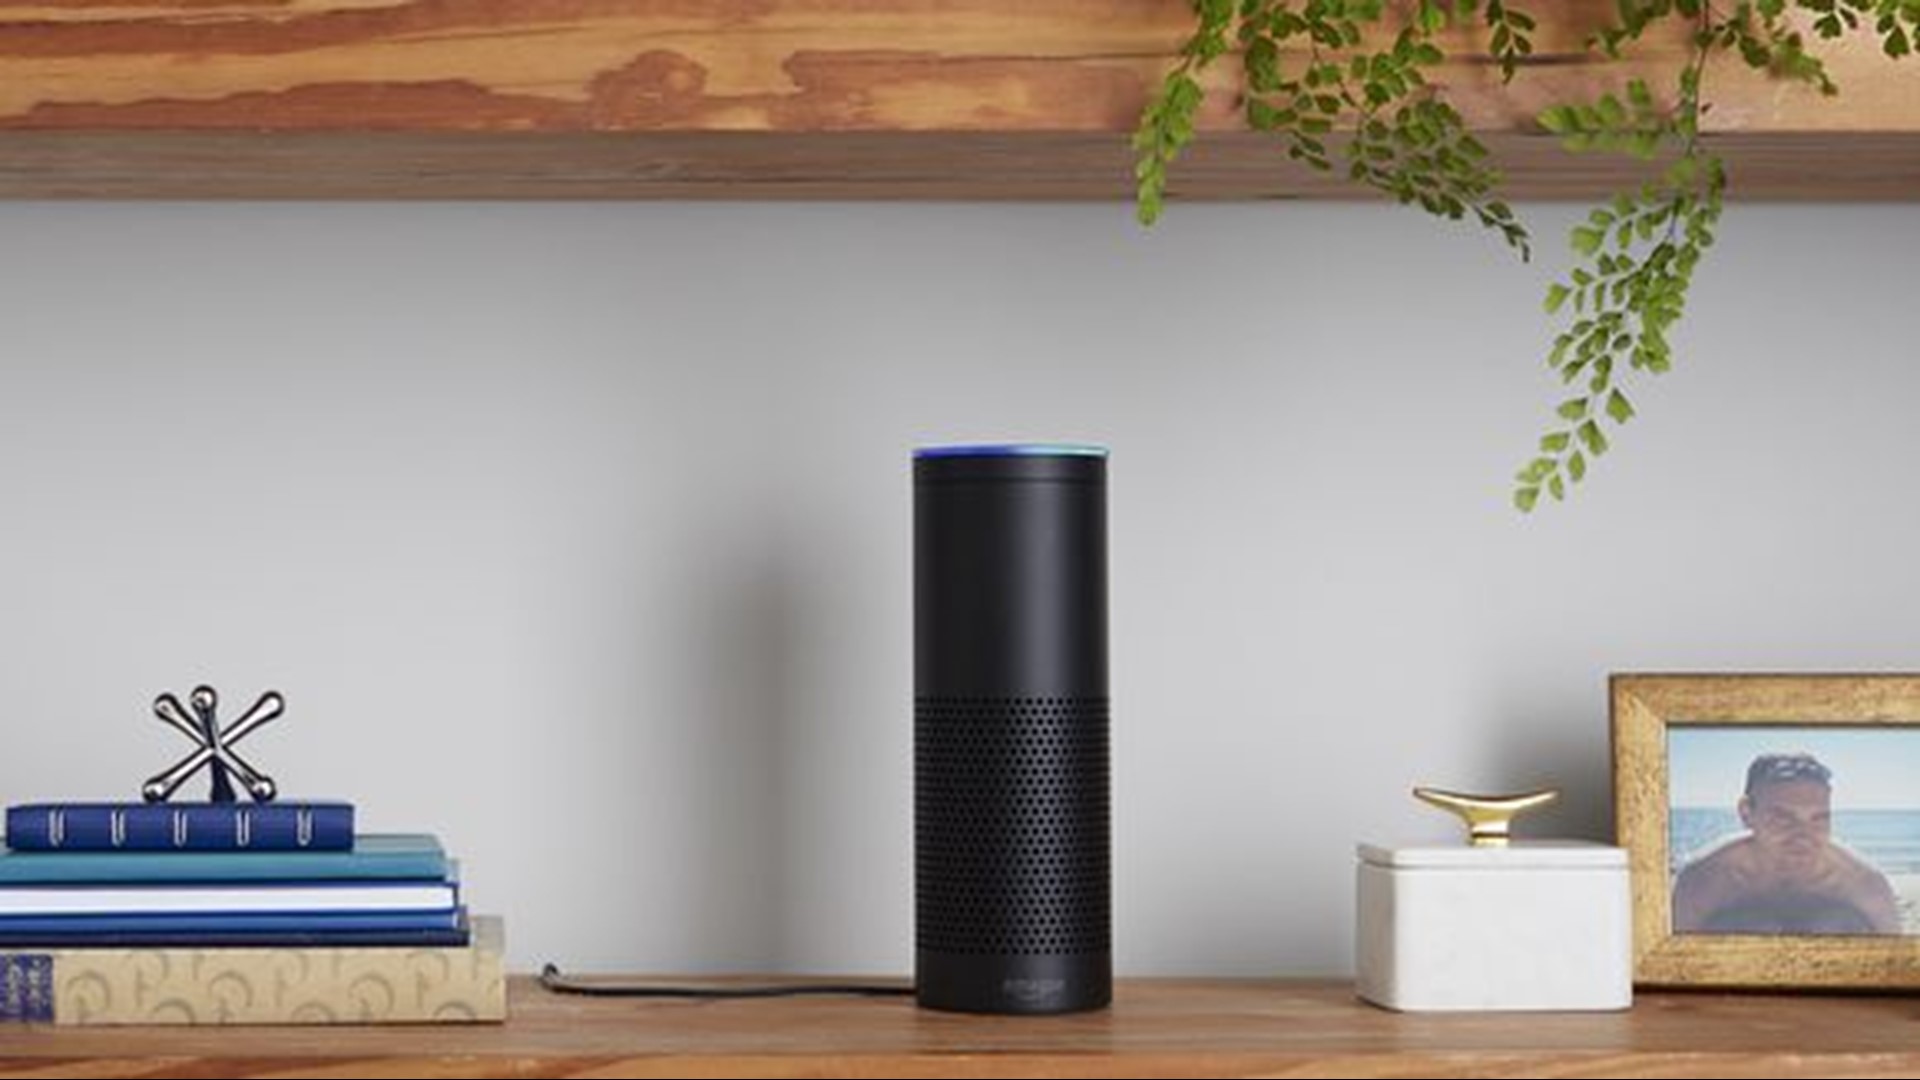 A new system update will give Amazon Alexa a more neutral sounding voice when reading news headlines. Plus, singer-songwriter Gladys Knight is set to perform the National Anthem at the Super Bowl.